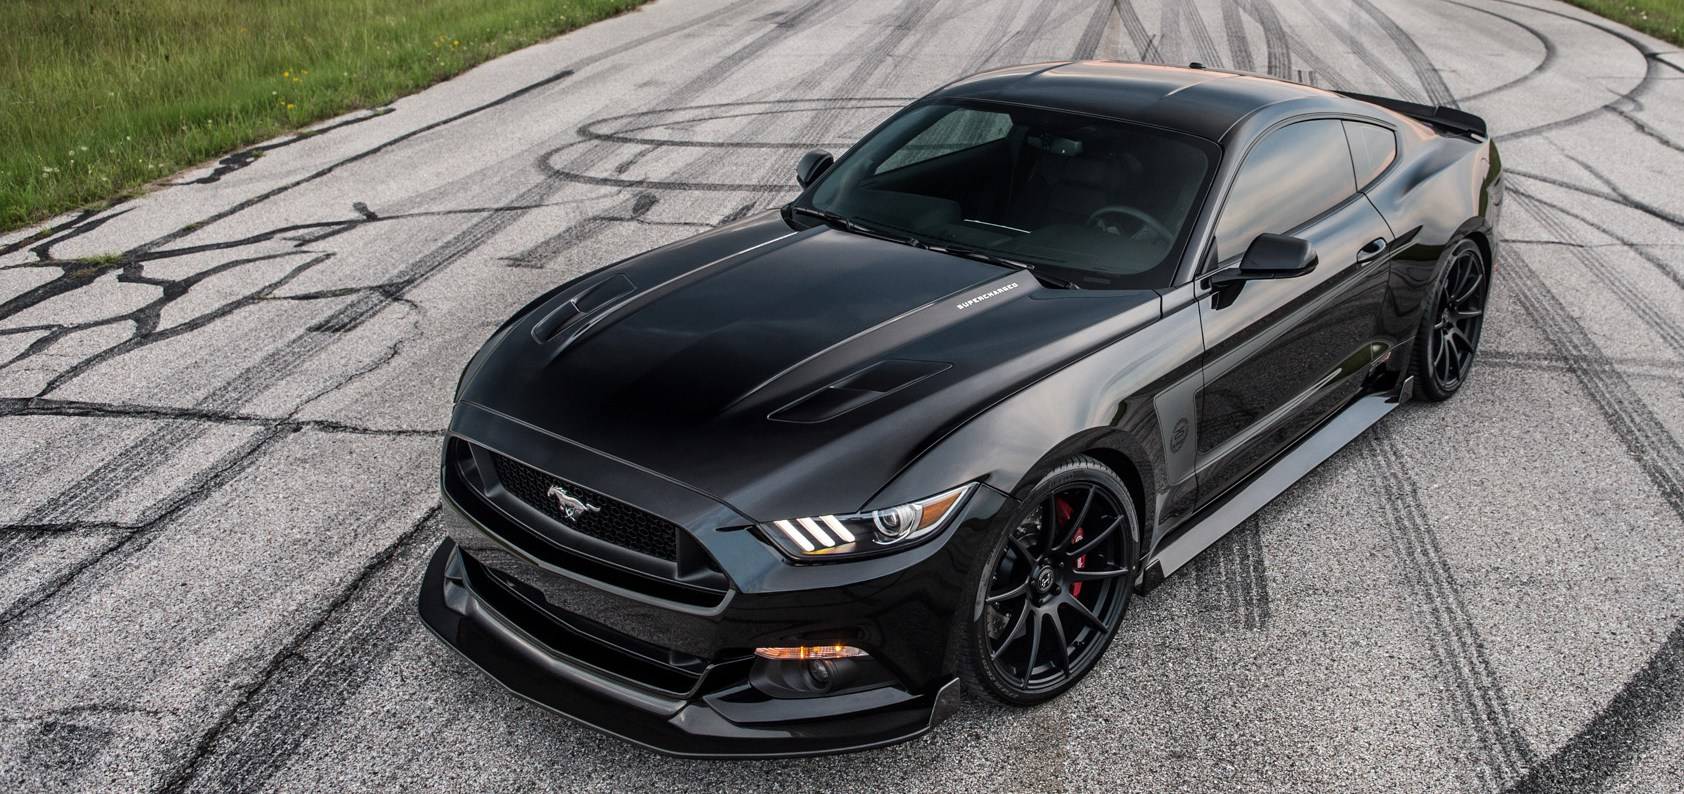 Hennessey-HPE800-Ford-Mustang-1-autonovosti.me-1